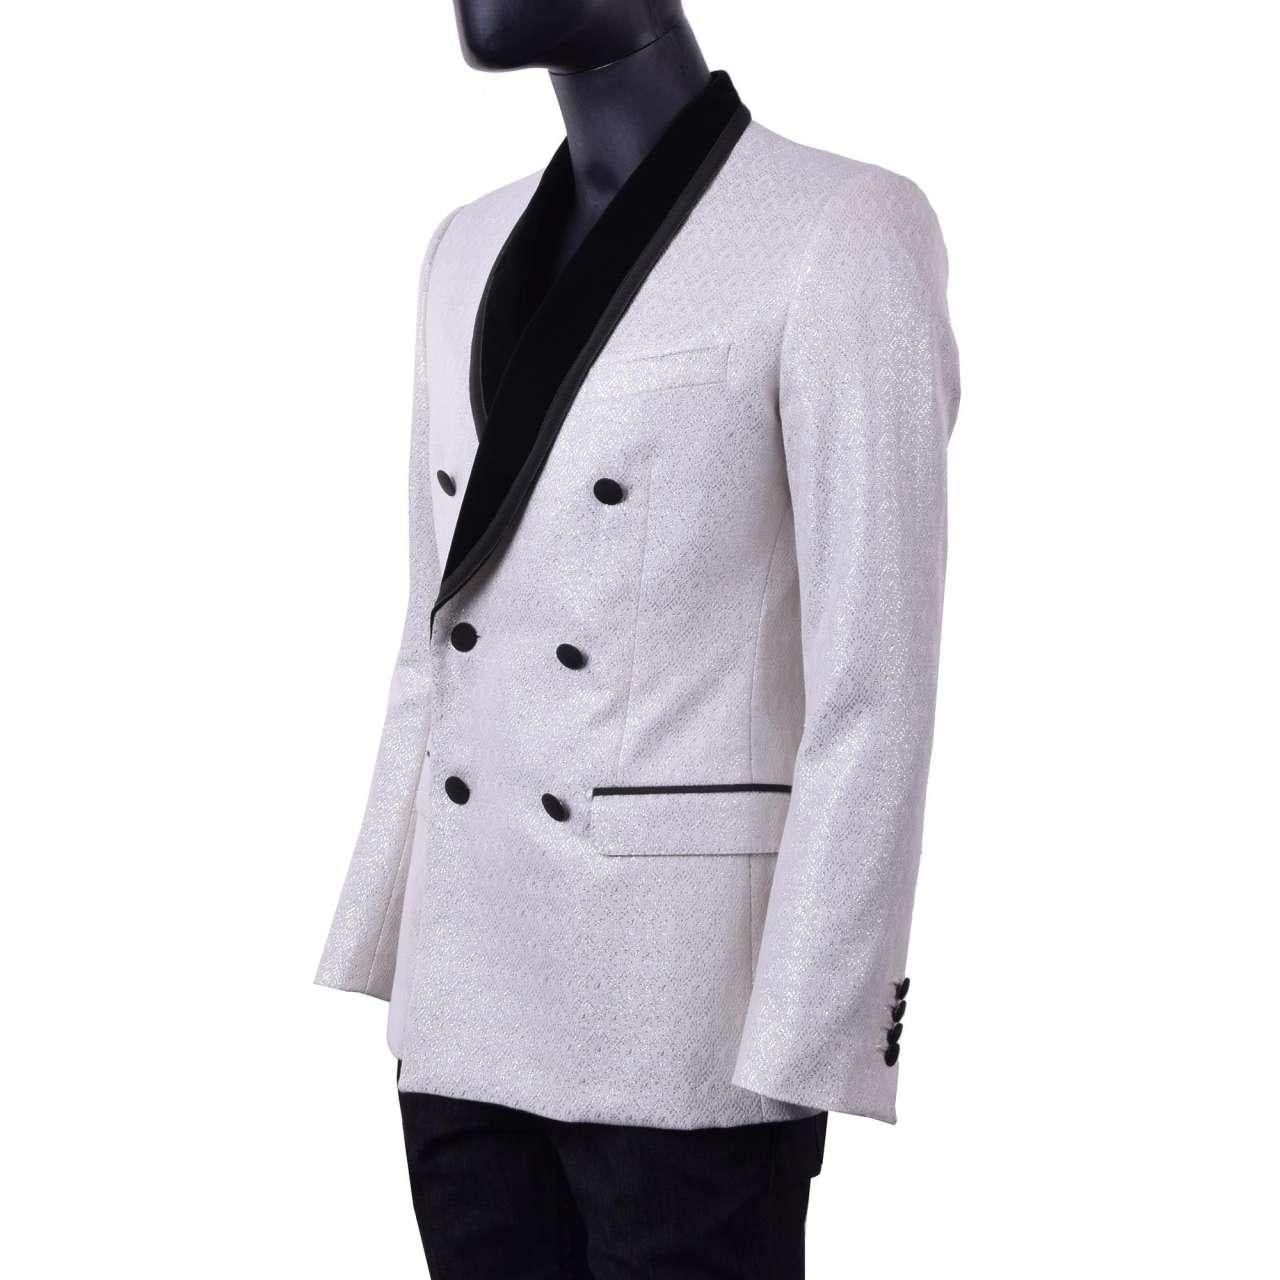 Dolce & Gabbana - Double-Breasted Brocade Blazer White 44 For Sale 1